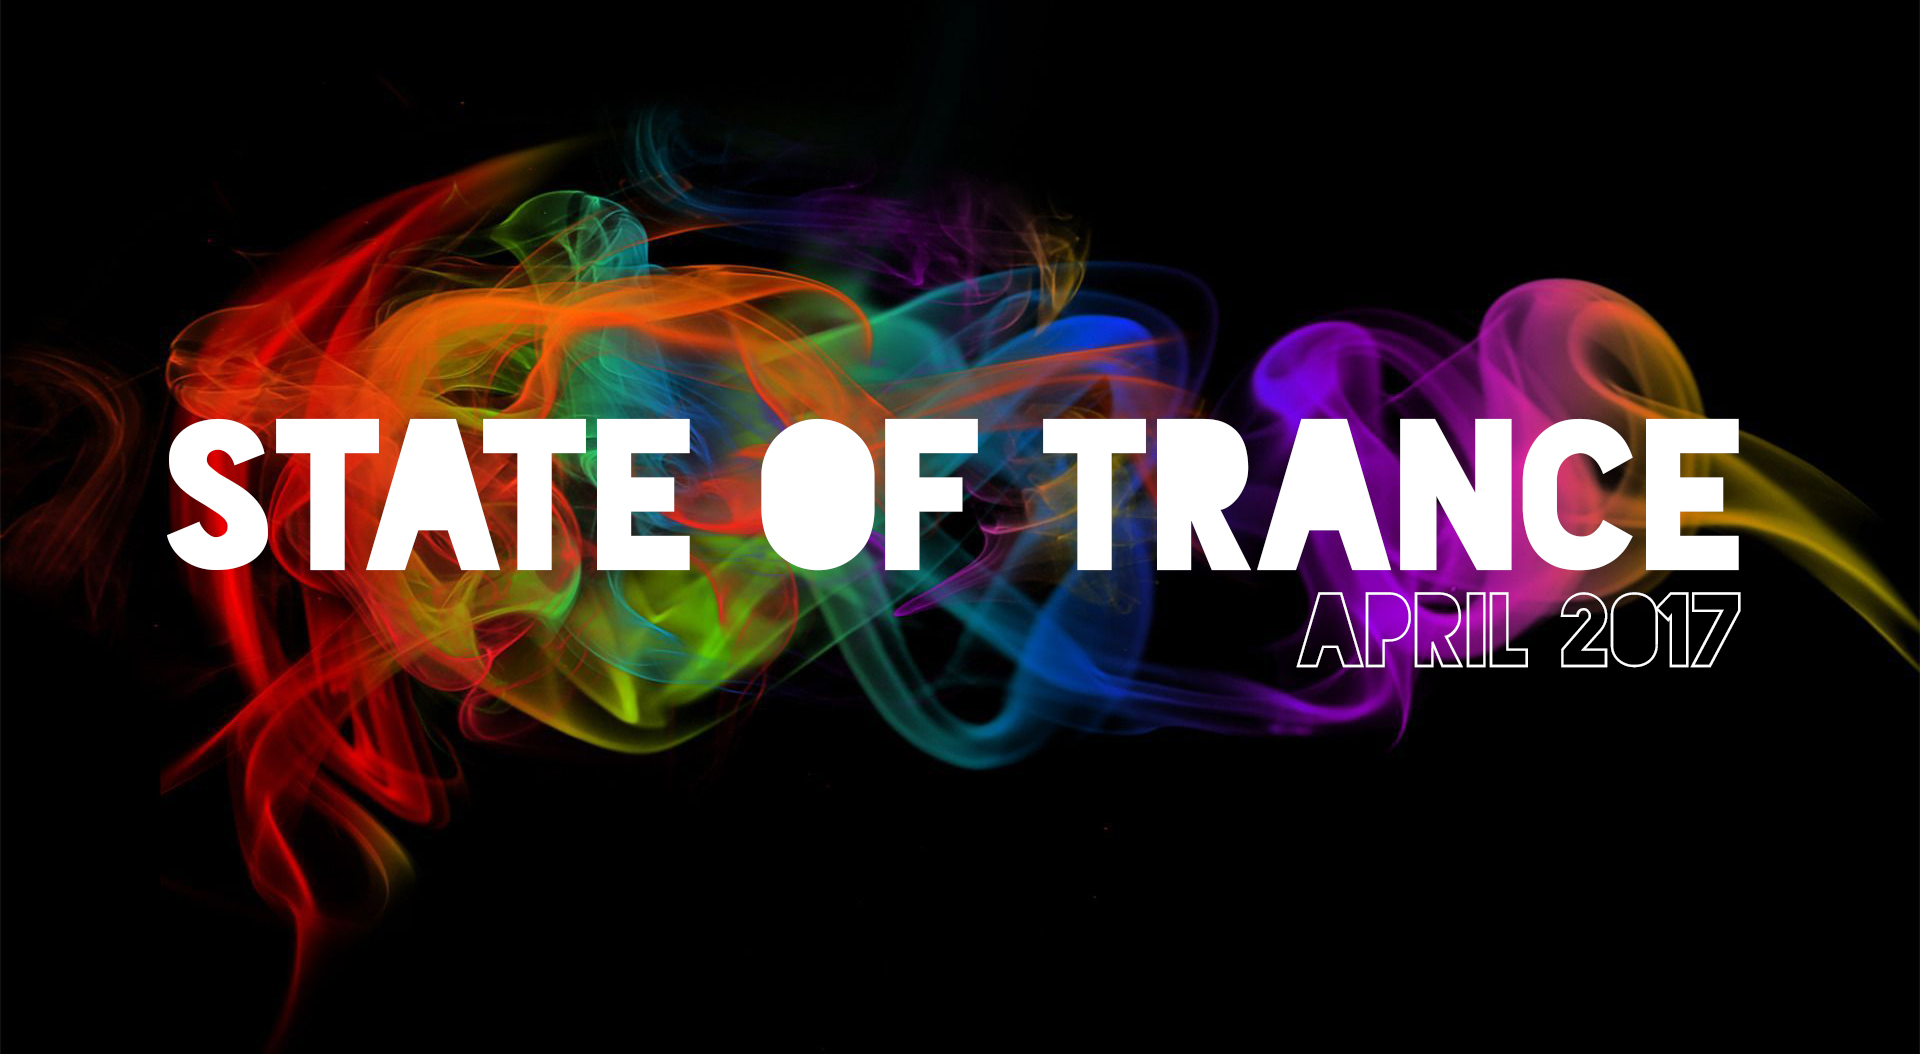 [TRANCE] Connect With Our Top 10 Trance Tracks For April 2017